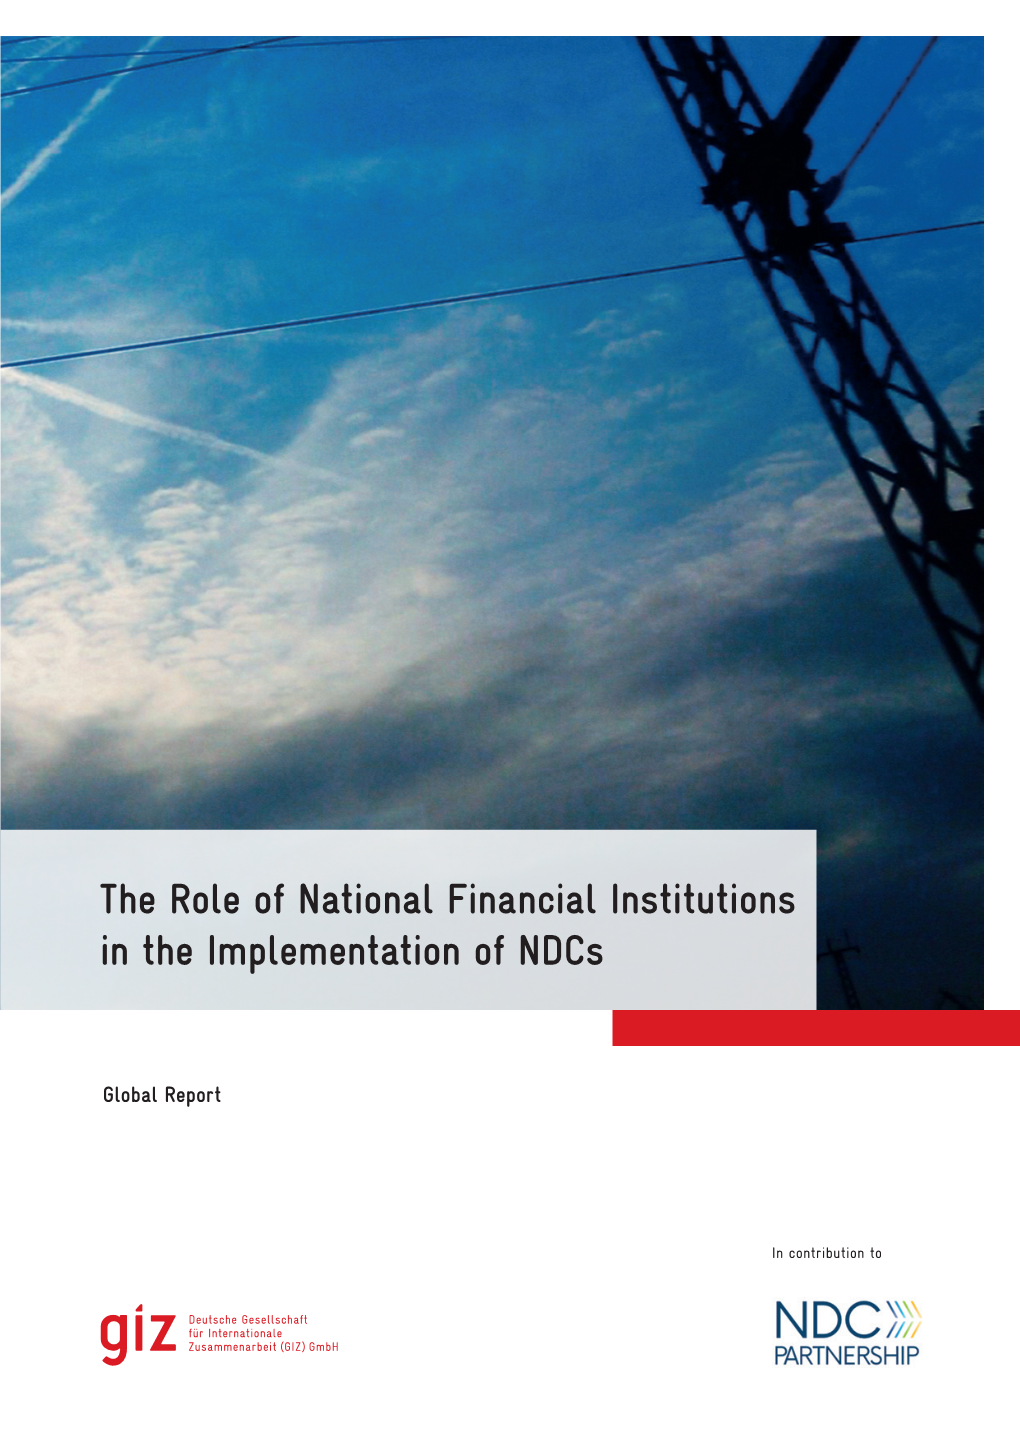 The Role of National Financial Institutions in the Implementation of Ndcs